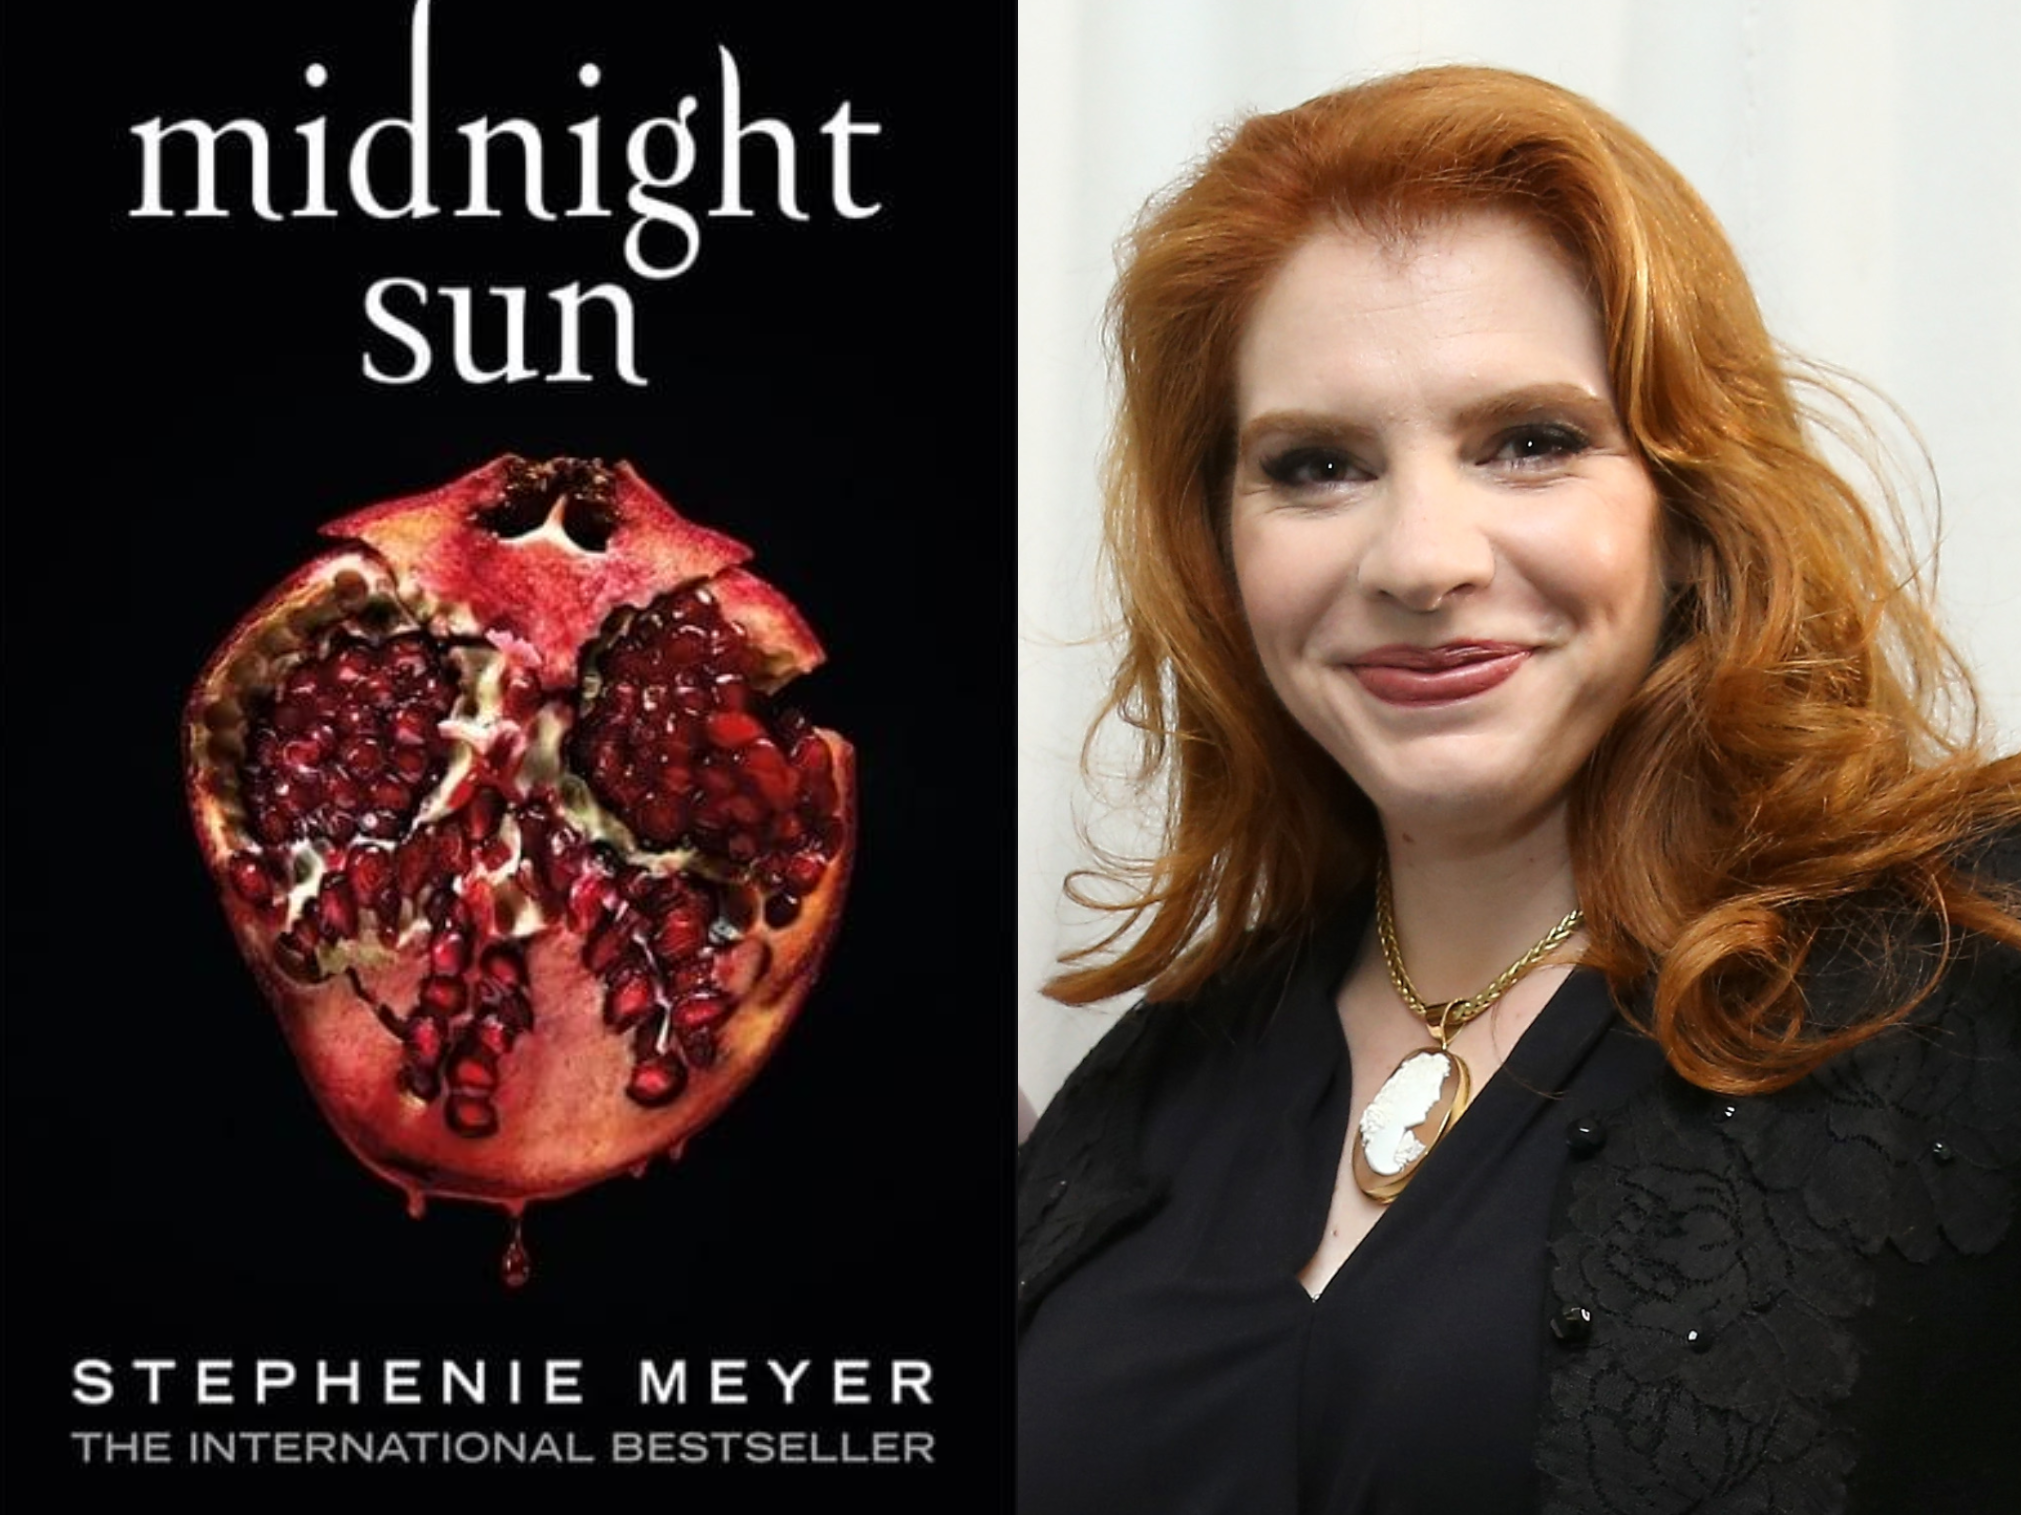 Stephanie Meyer’s latest bestseller is another instalment in the hit Twilight franchise